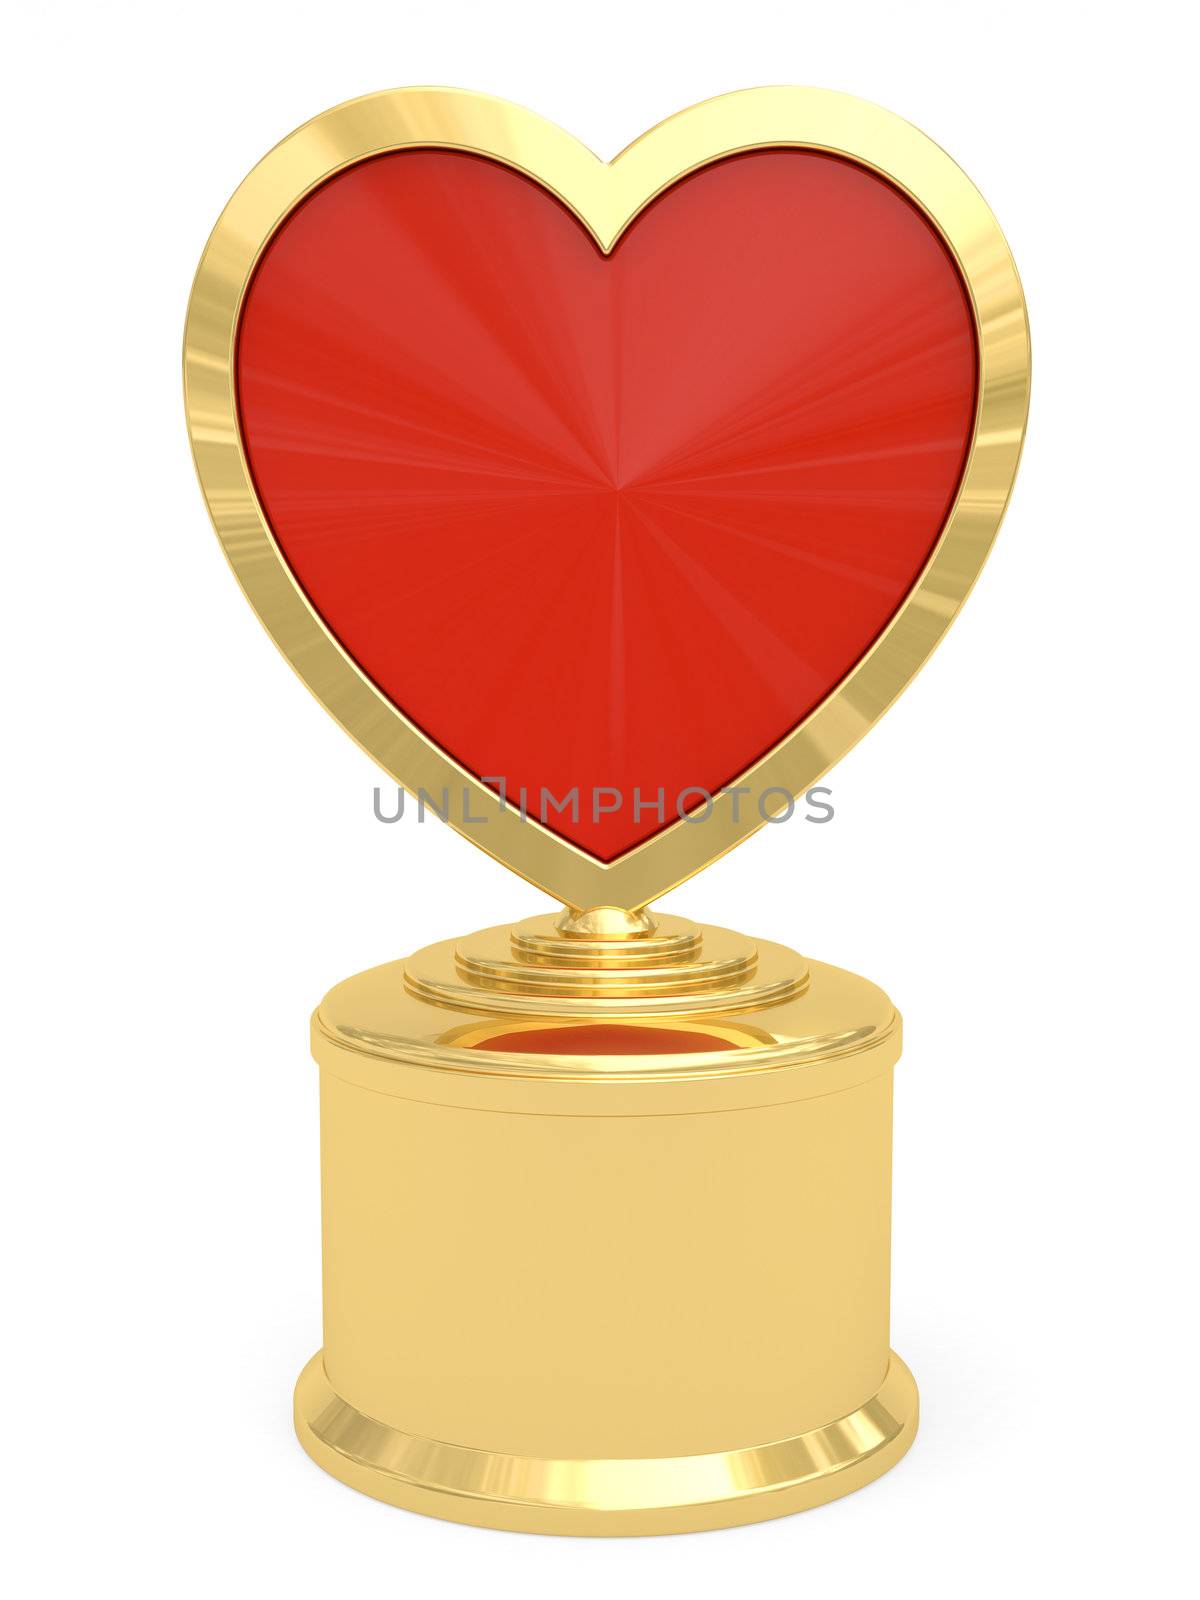 Golden heart shaped prize on white background. High resolution 3D image